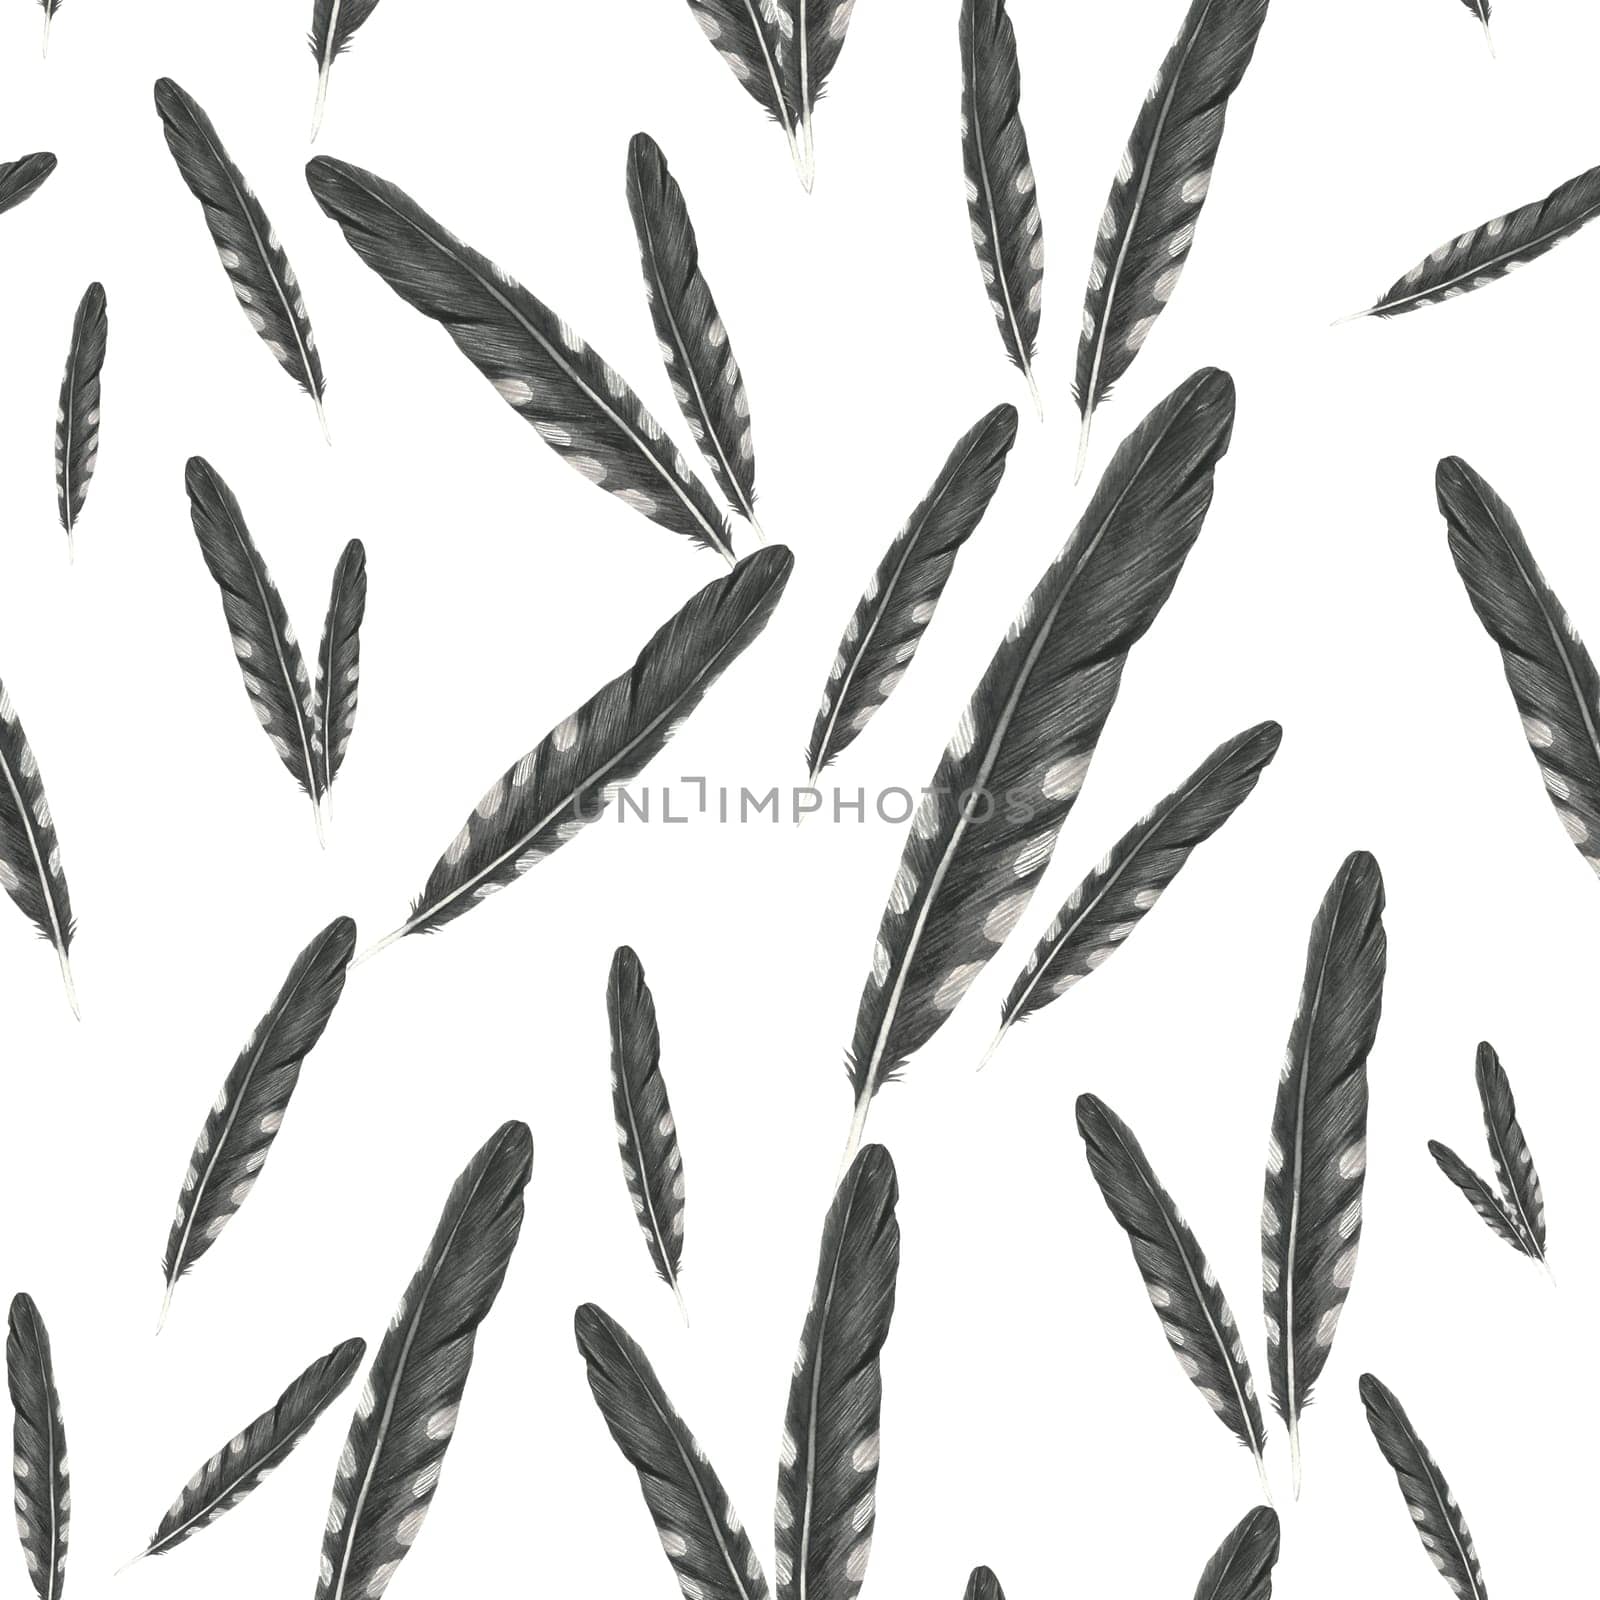 Seamless pattern watercolor illustration of cuckoo feathers, isolated on a white background hand drawn.